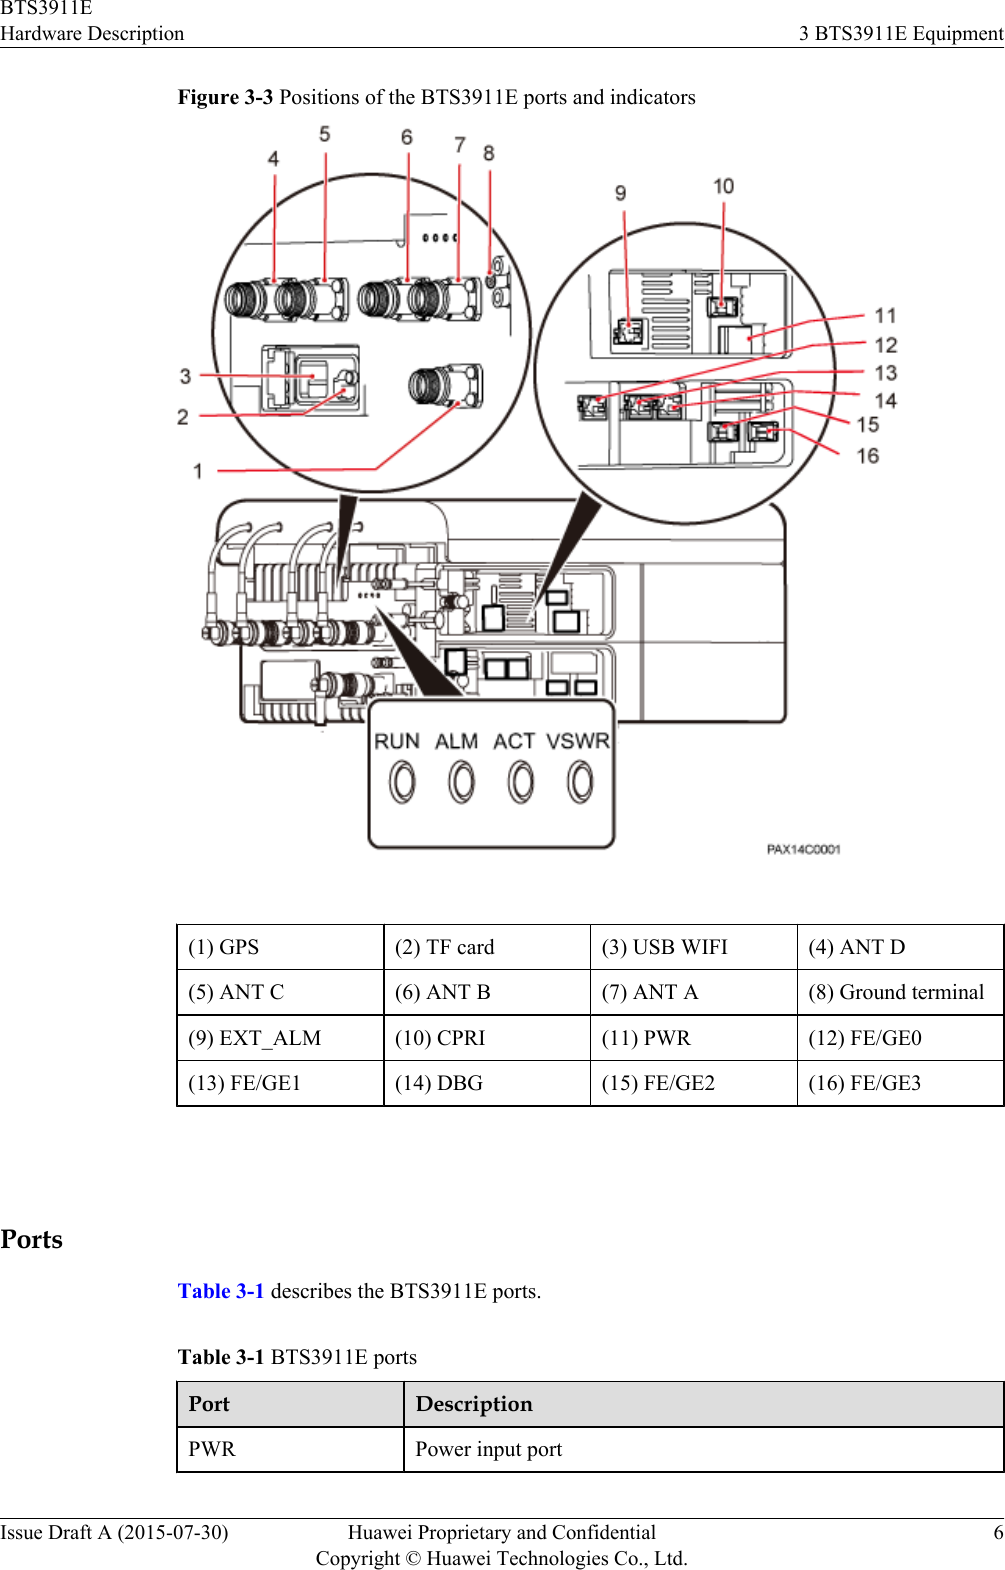 Figure 3-3 Positions of the BTS3911E ports and indicators(1) GPS (2) TF card (3) USB WIFI (4) ANT D(5) ANT C (6) ANT B (7) ANT A (8) Ground terminal(9) EXT_ALM (10) CPRI (11) PWR (12) FE/GE0(13) FE/GE1 (14) DBG (15) FE/GE2 (16) FE/GE3 PortsTable 3-1 describes the BTS3911E ports.Table 3-1 BTS3911E portsPort DescriptionPWR Power input portBTS3911EHardware Description 3 BTS3911E EquipmentIssue Draft A (2015-07-30) Huawei Proprietary and ConfidentialCopyright © Huawei Technologies Co., Ltd.6